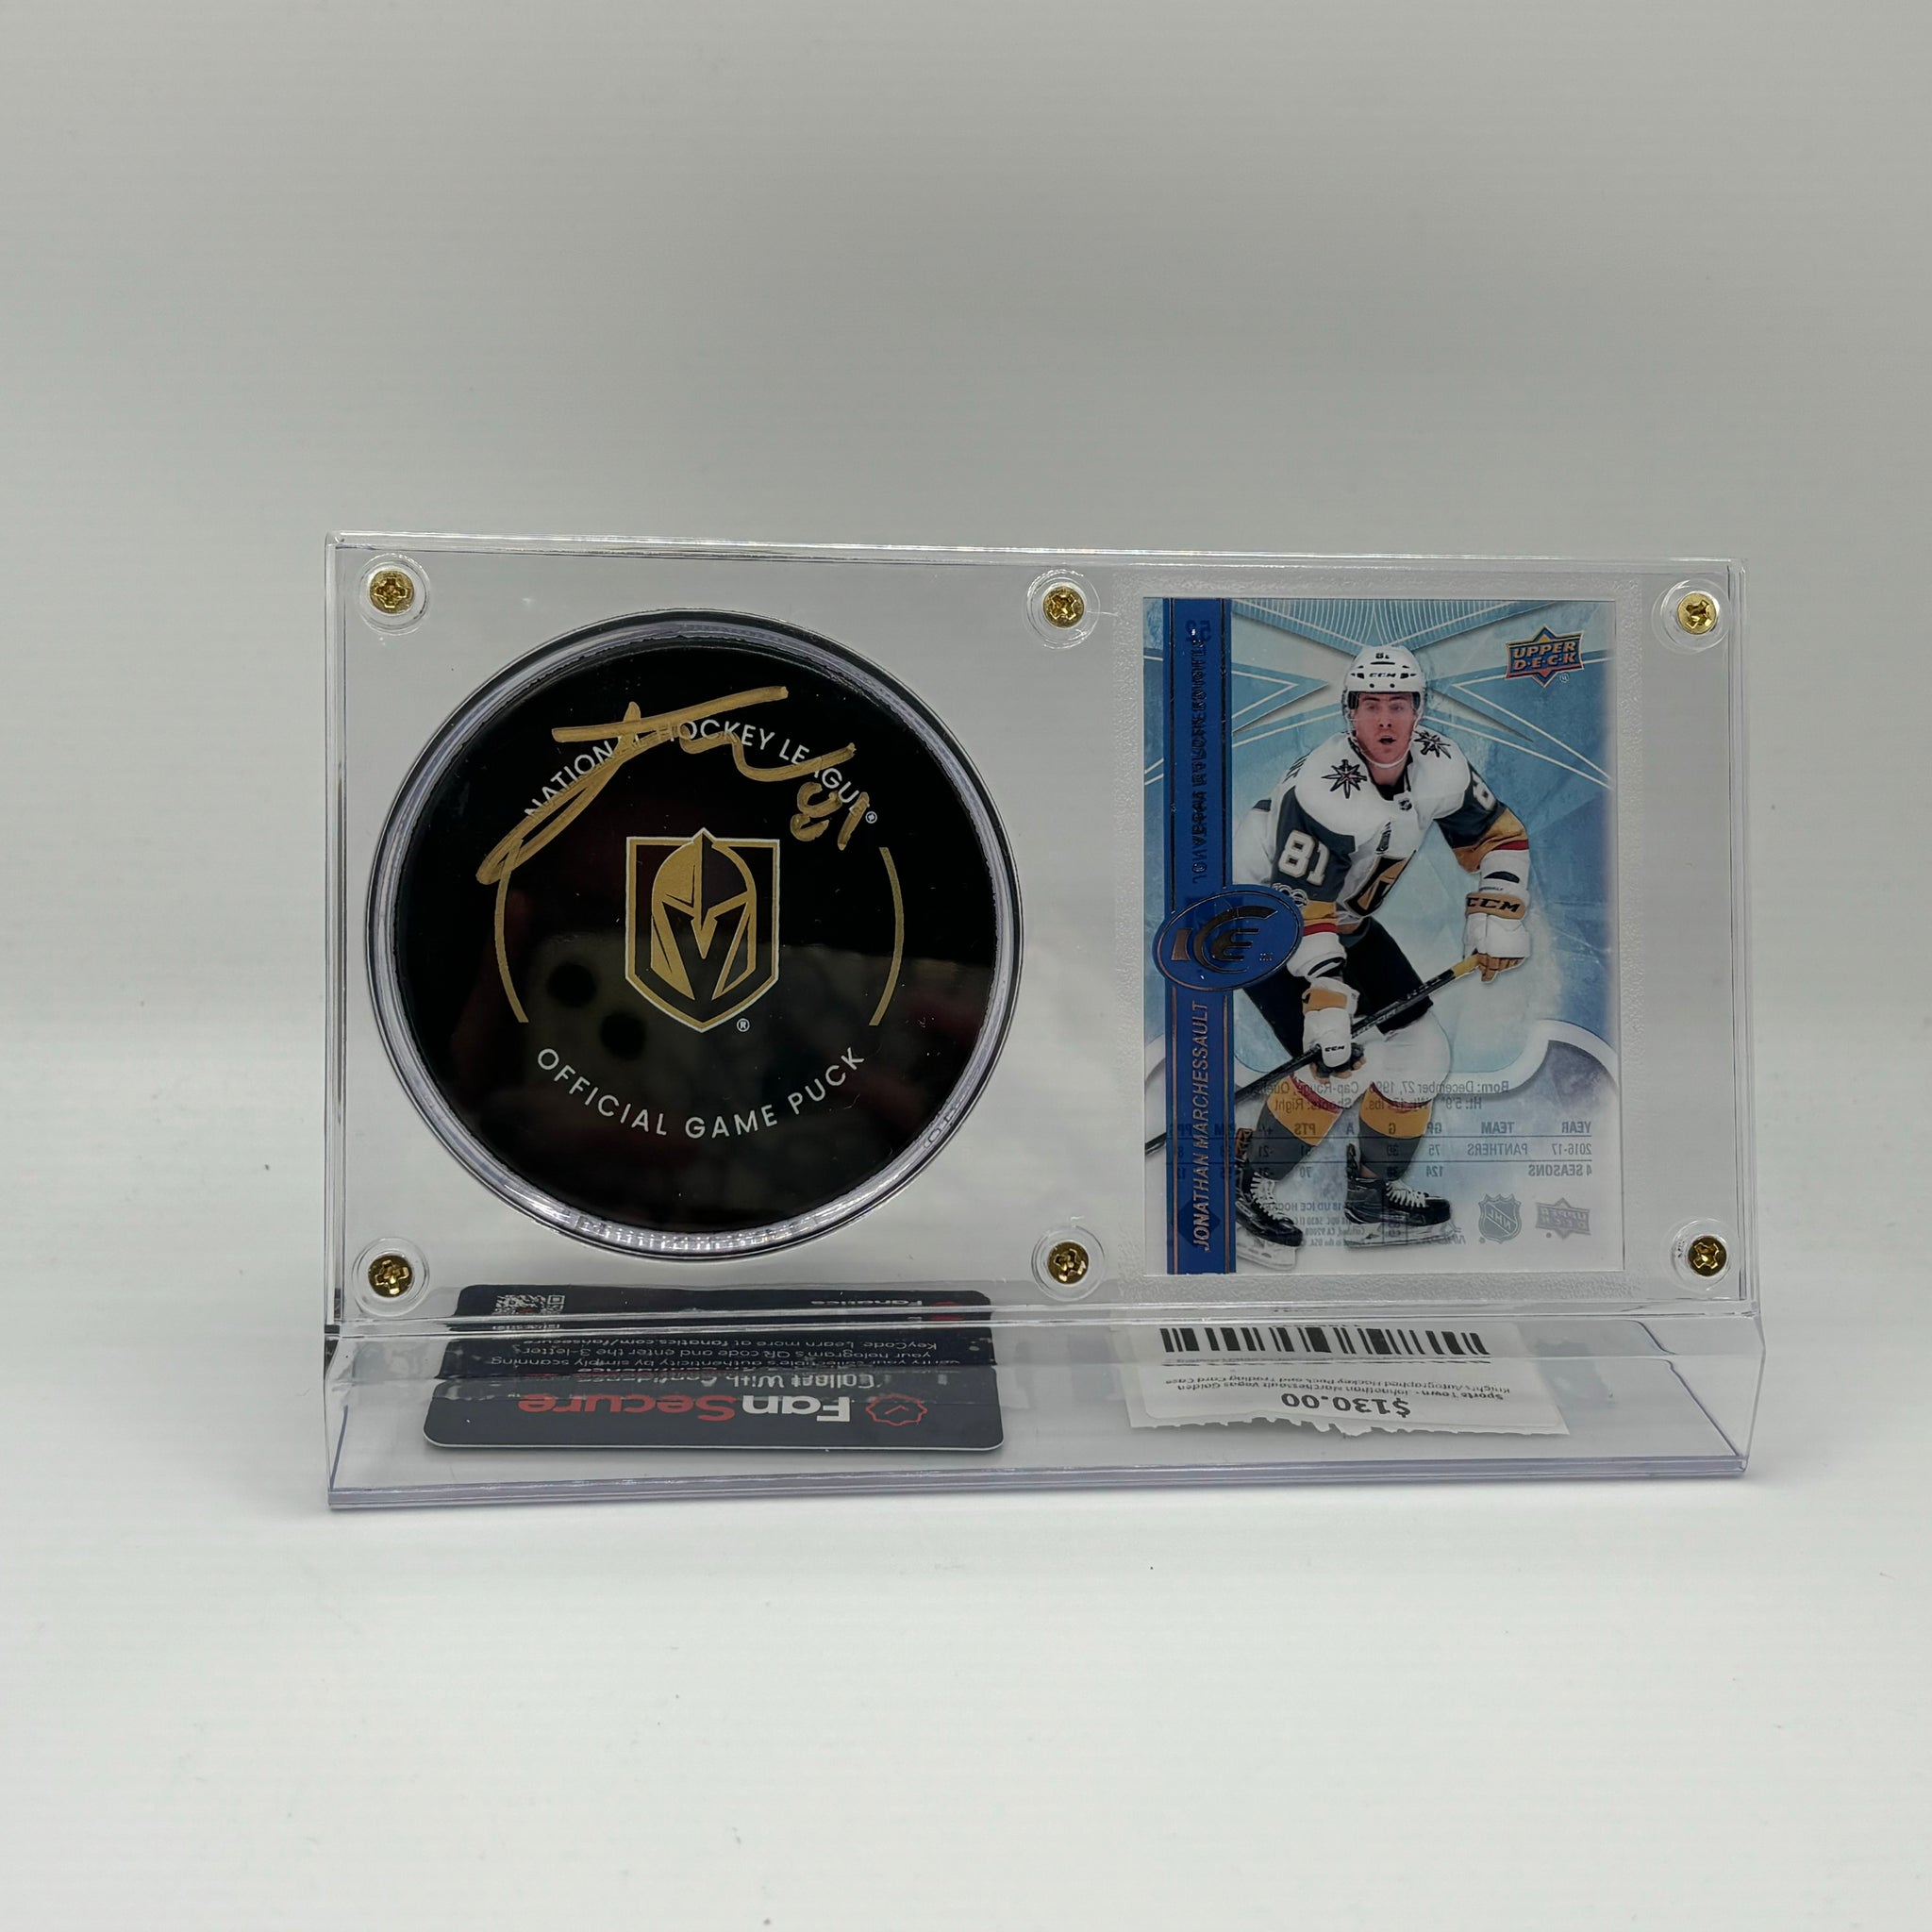 Johnathan Marchessault Vegas Golden Knights Autographed Hockey Puck and Trading Card Case